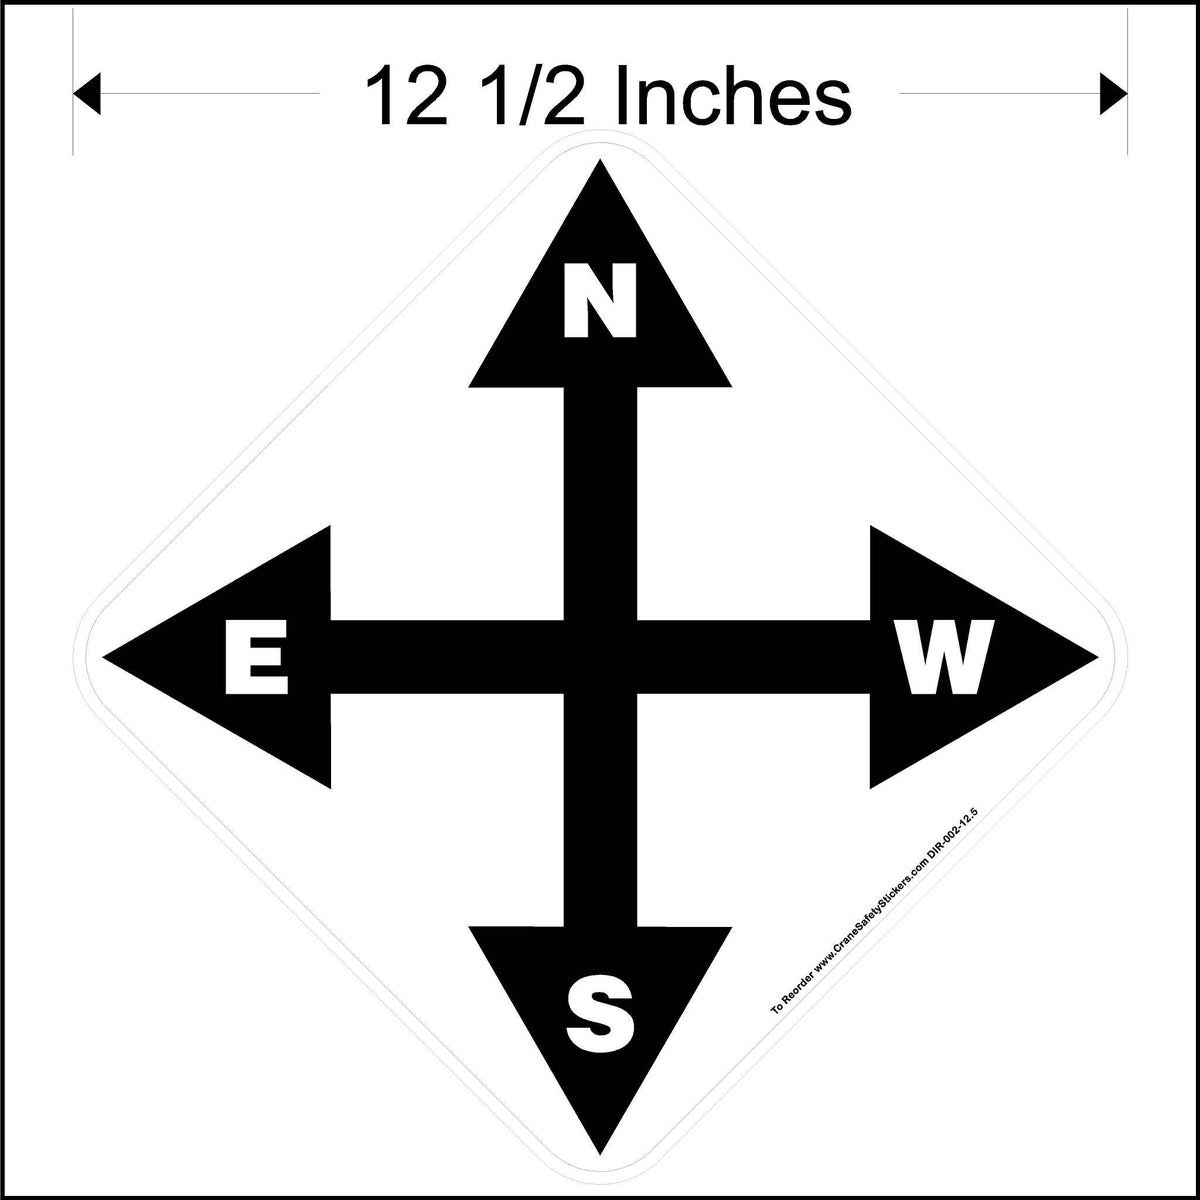 12.5 Inch North South West East Overhead Crane Directional Decal.